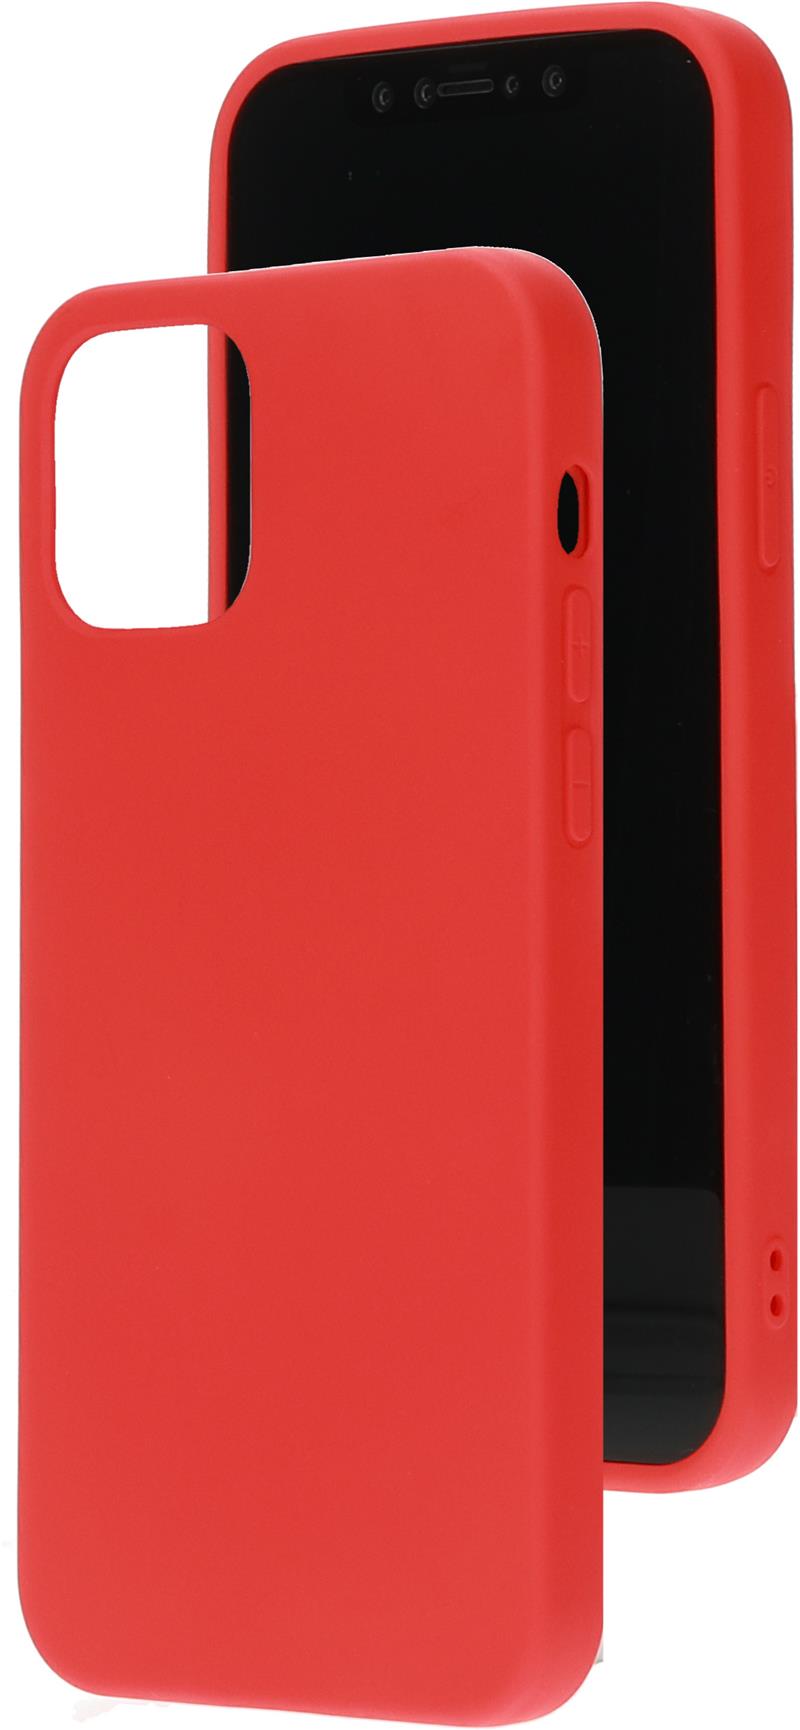 Mobiparts Silicone Cover Apple iPhone 12 12 Pro Scarlet Red